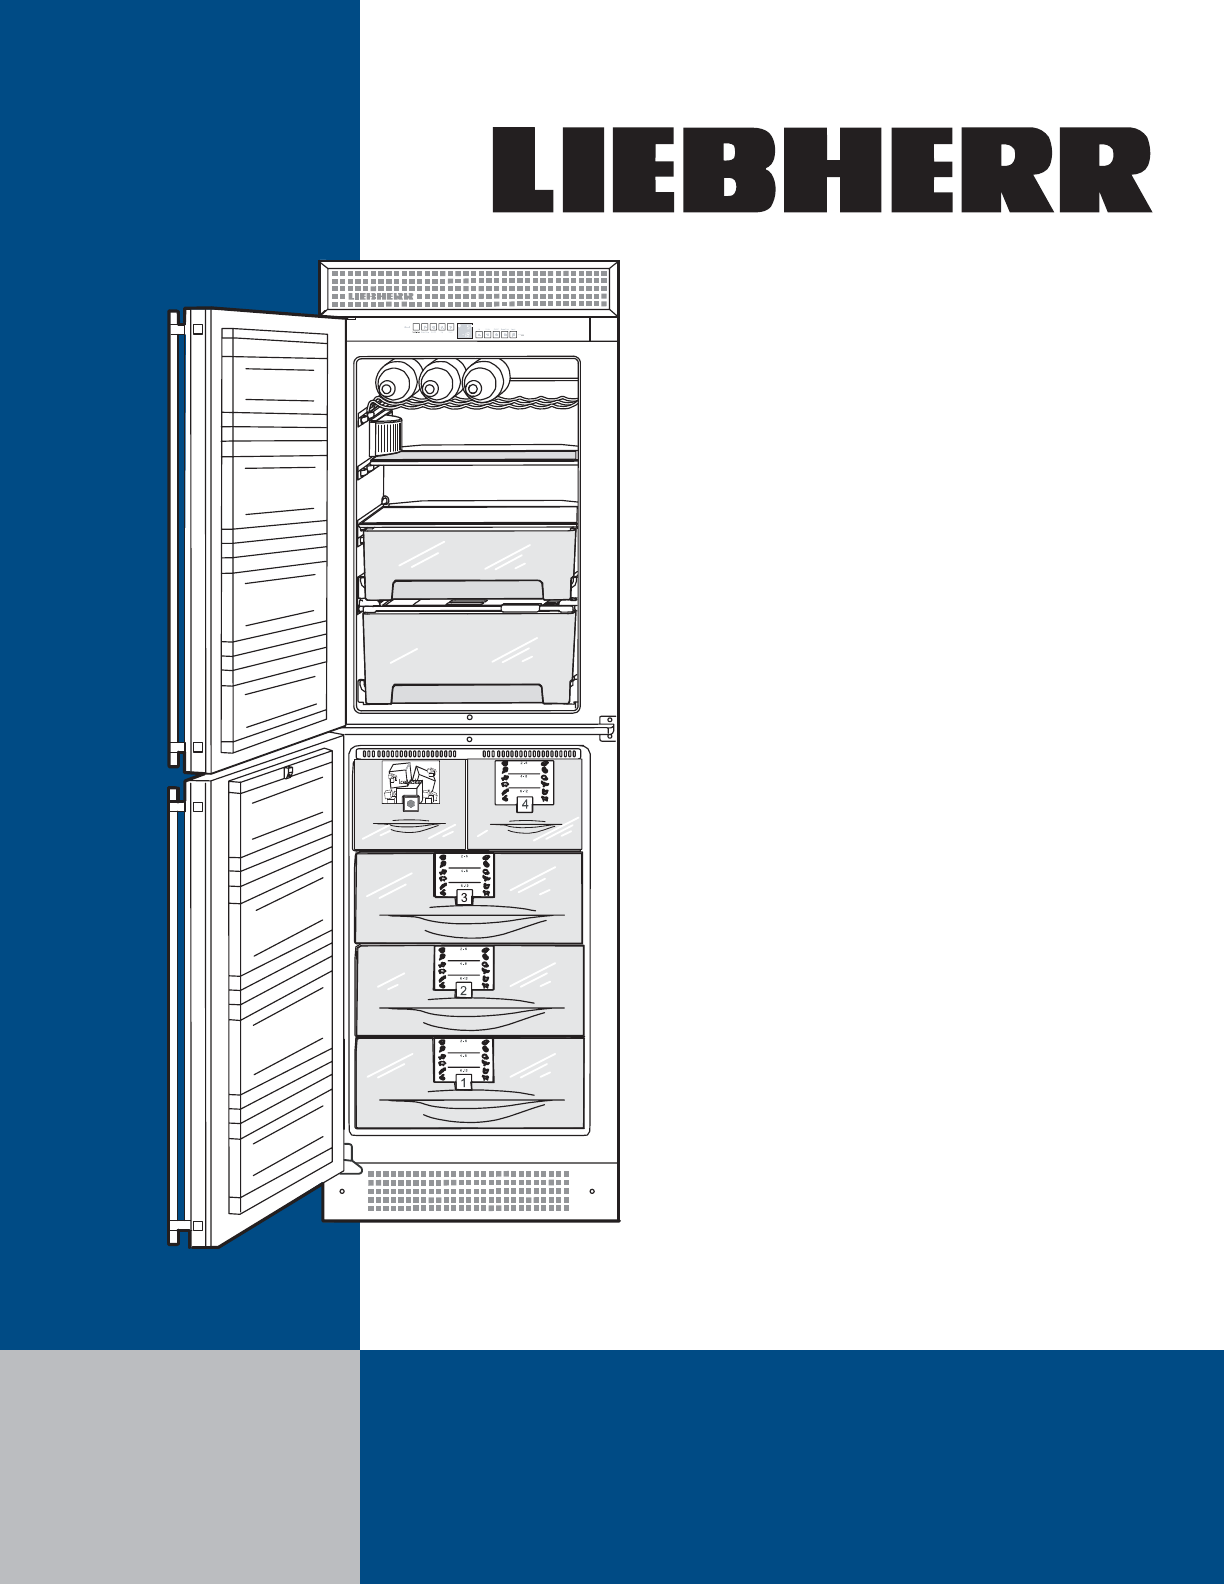 Water filter for liebherr refrigerator troubleshooting